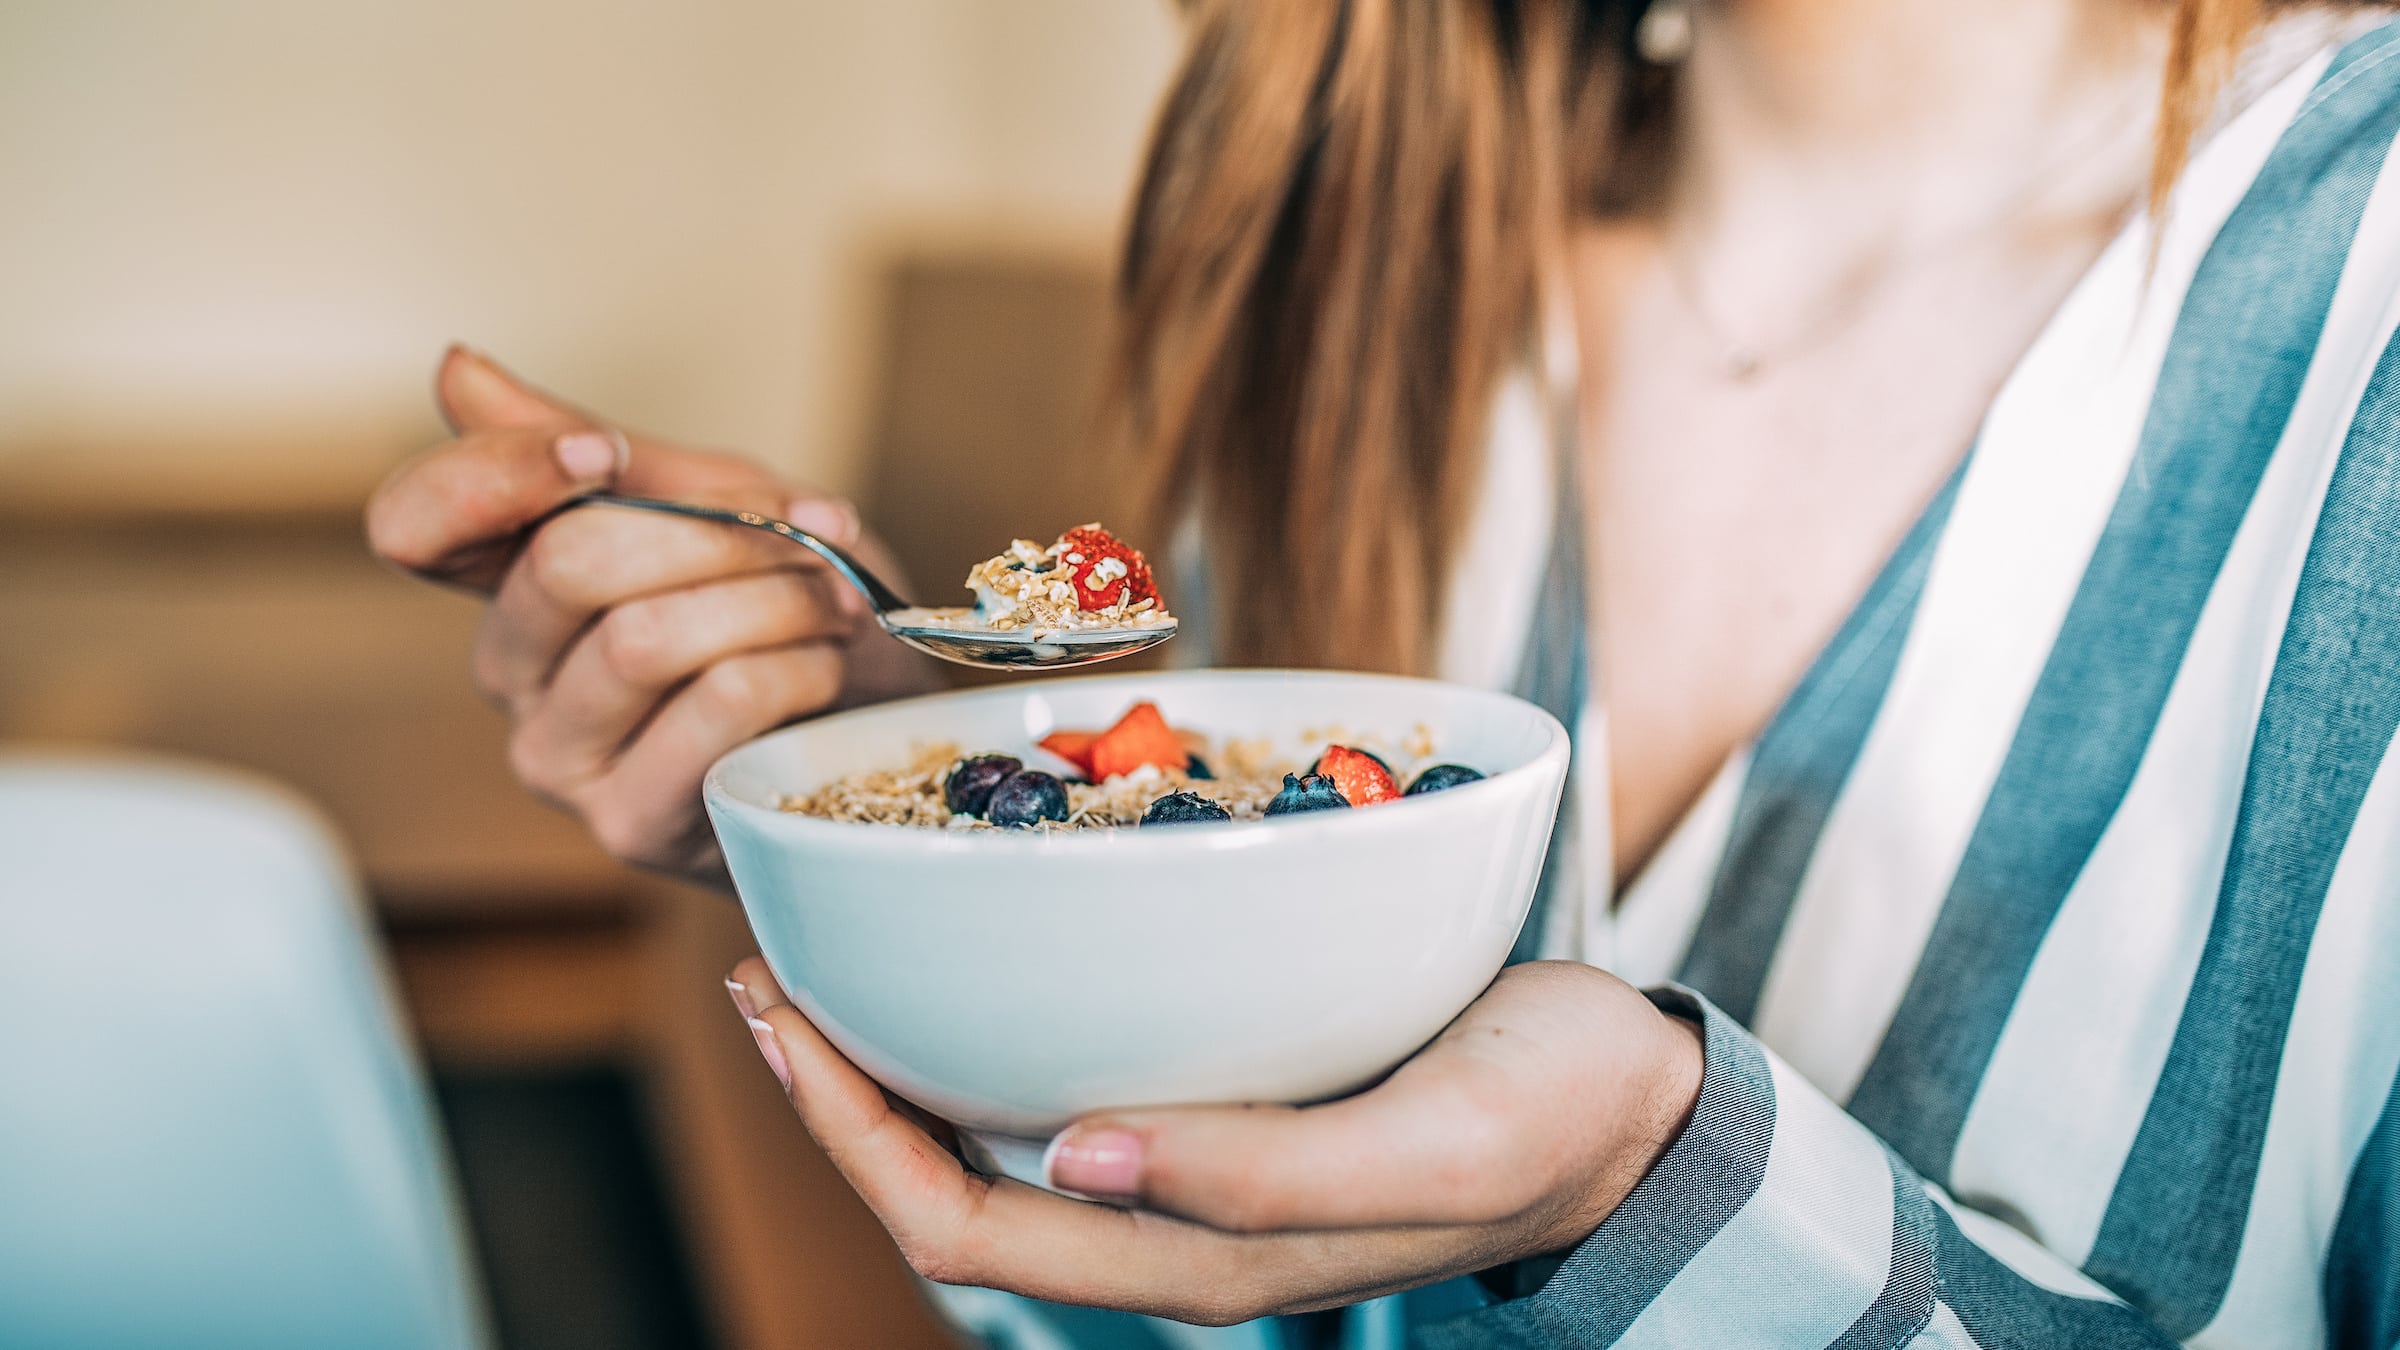 Woman holding bowl of cereal with blueberries and strawberries